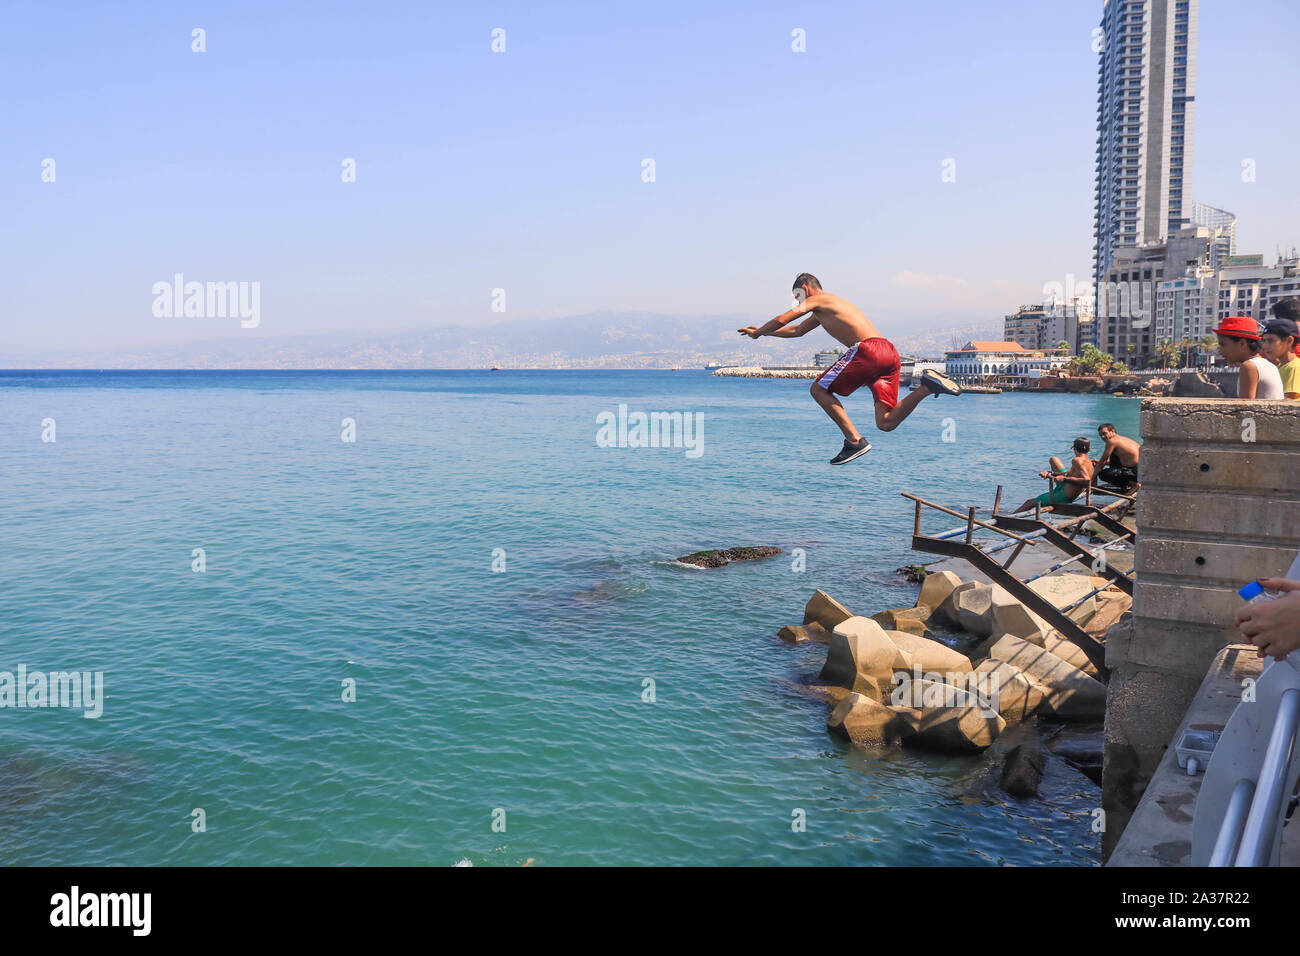 October 6, 2019, Beirut, Lebanon: A man dives into the sea during the hot and humid day in Beirut. (Credit Image: © Amer Ghazzal/SOPA Images via ZUMA Wire) Stock Photo